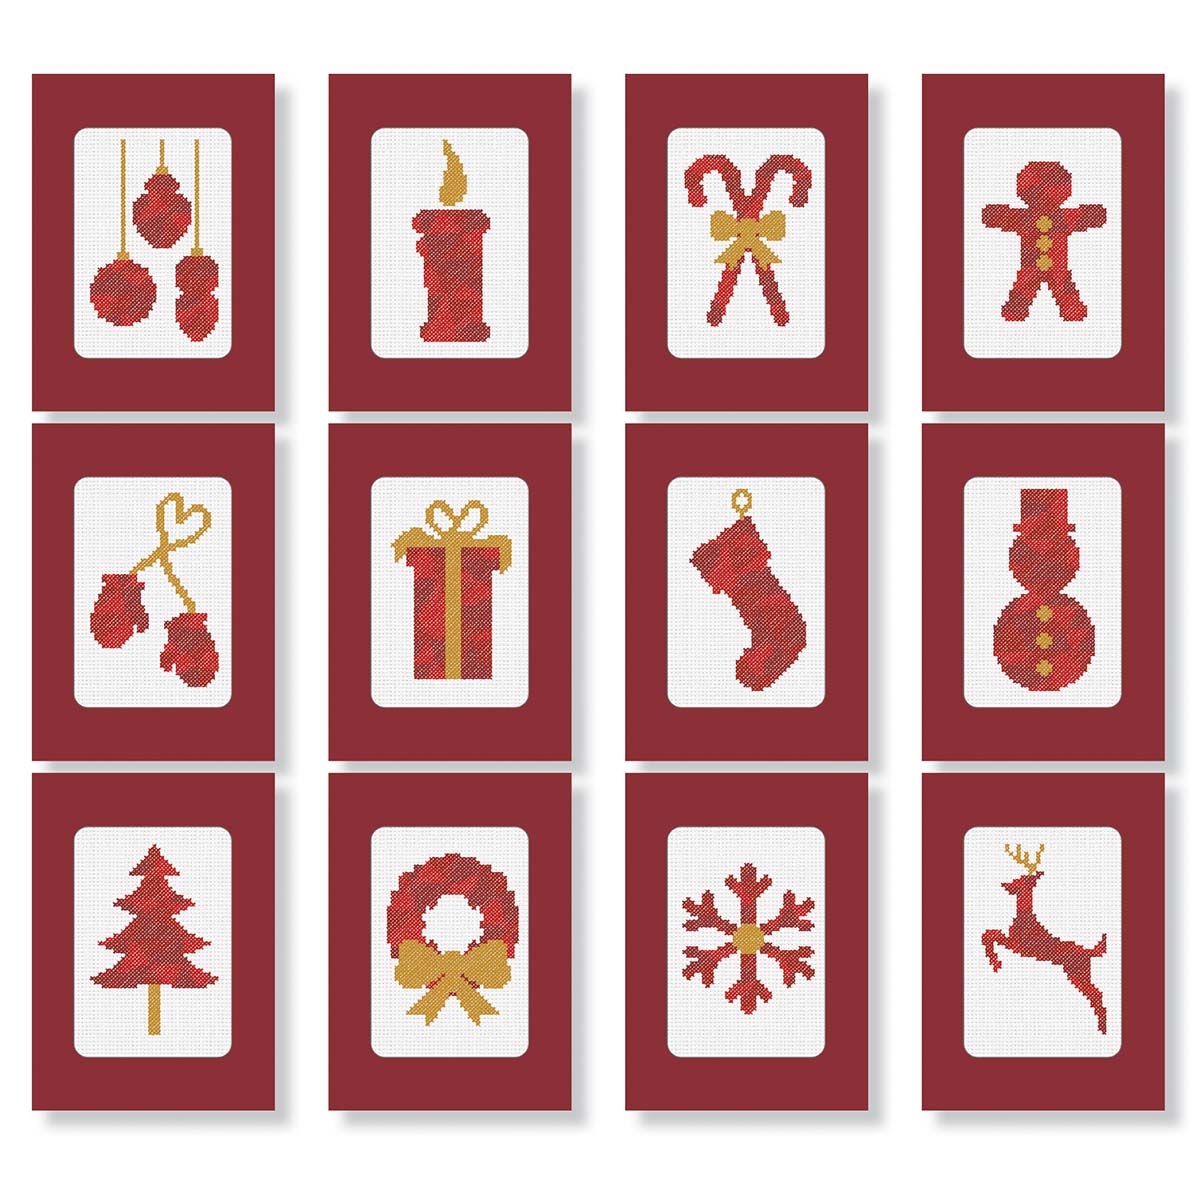 Herrschners Christmas Greeting Cards Stamped Cross-Stitch Kit